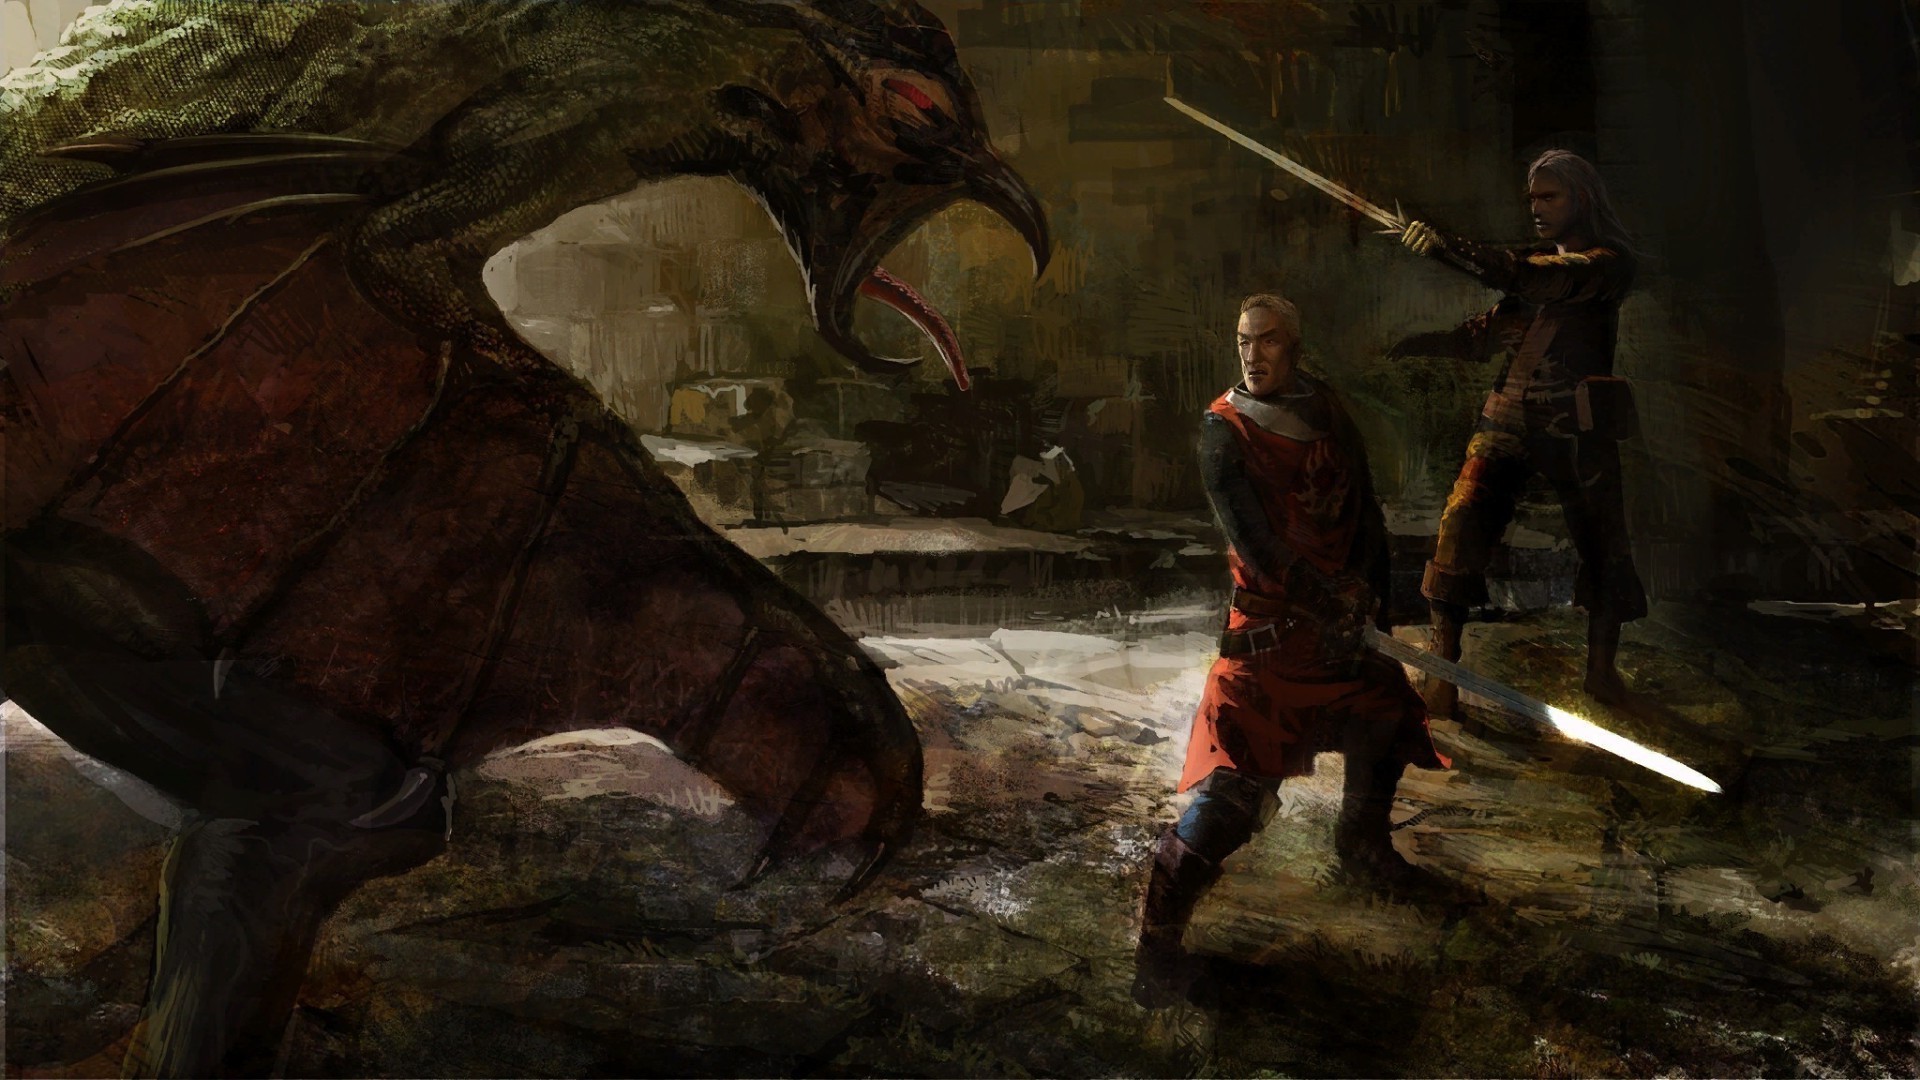 The Witcher, Fantasy Art, Video Games Wallpaper